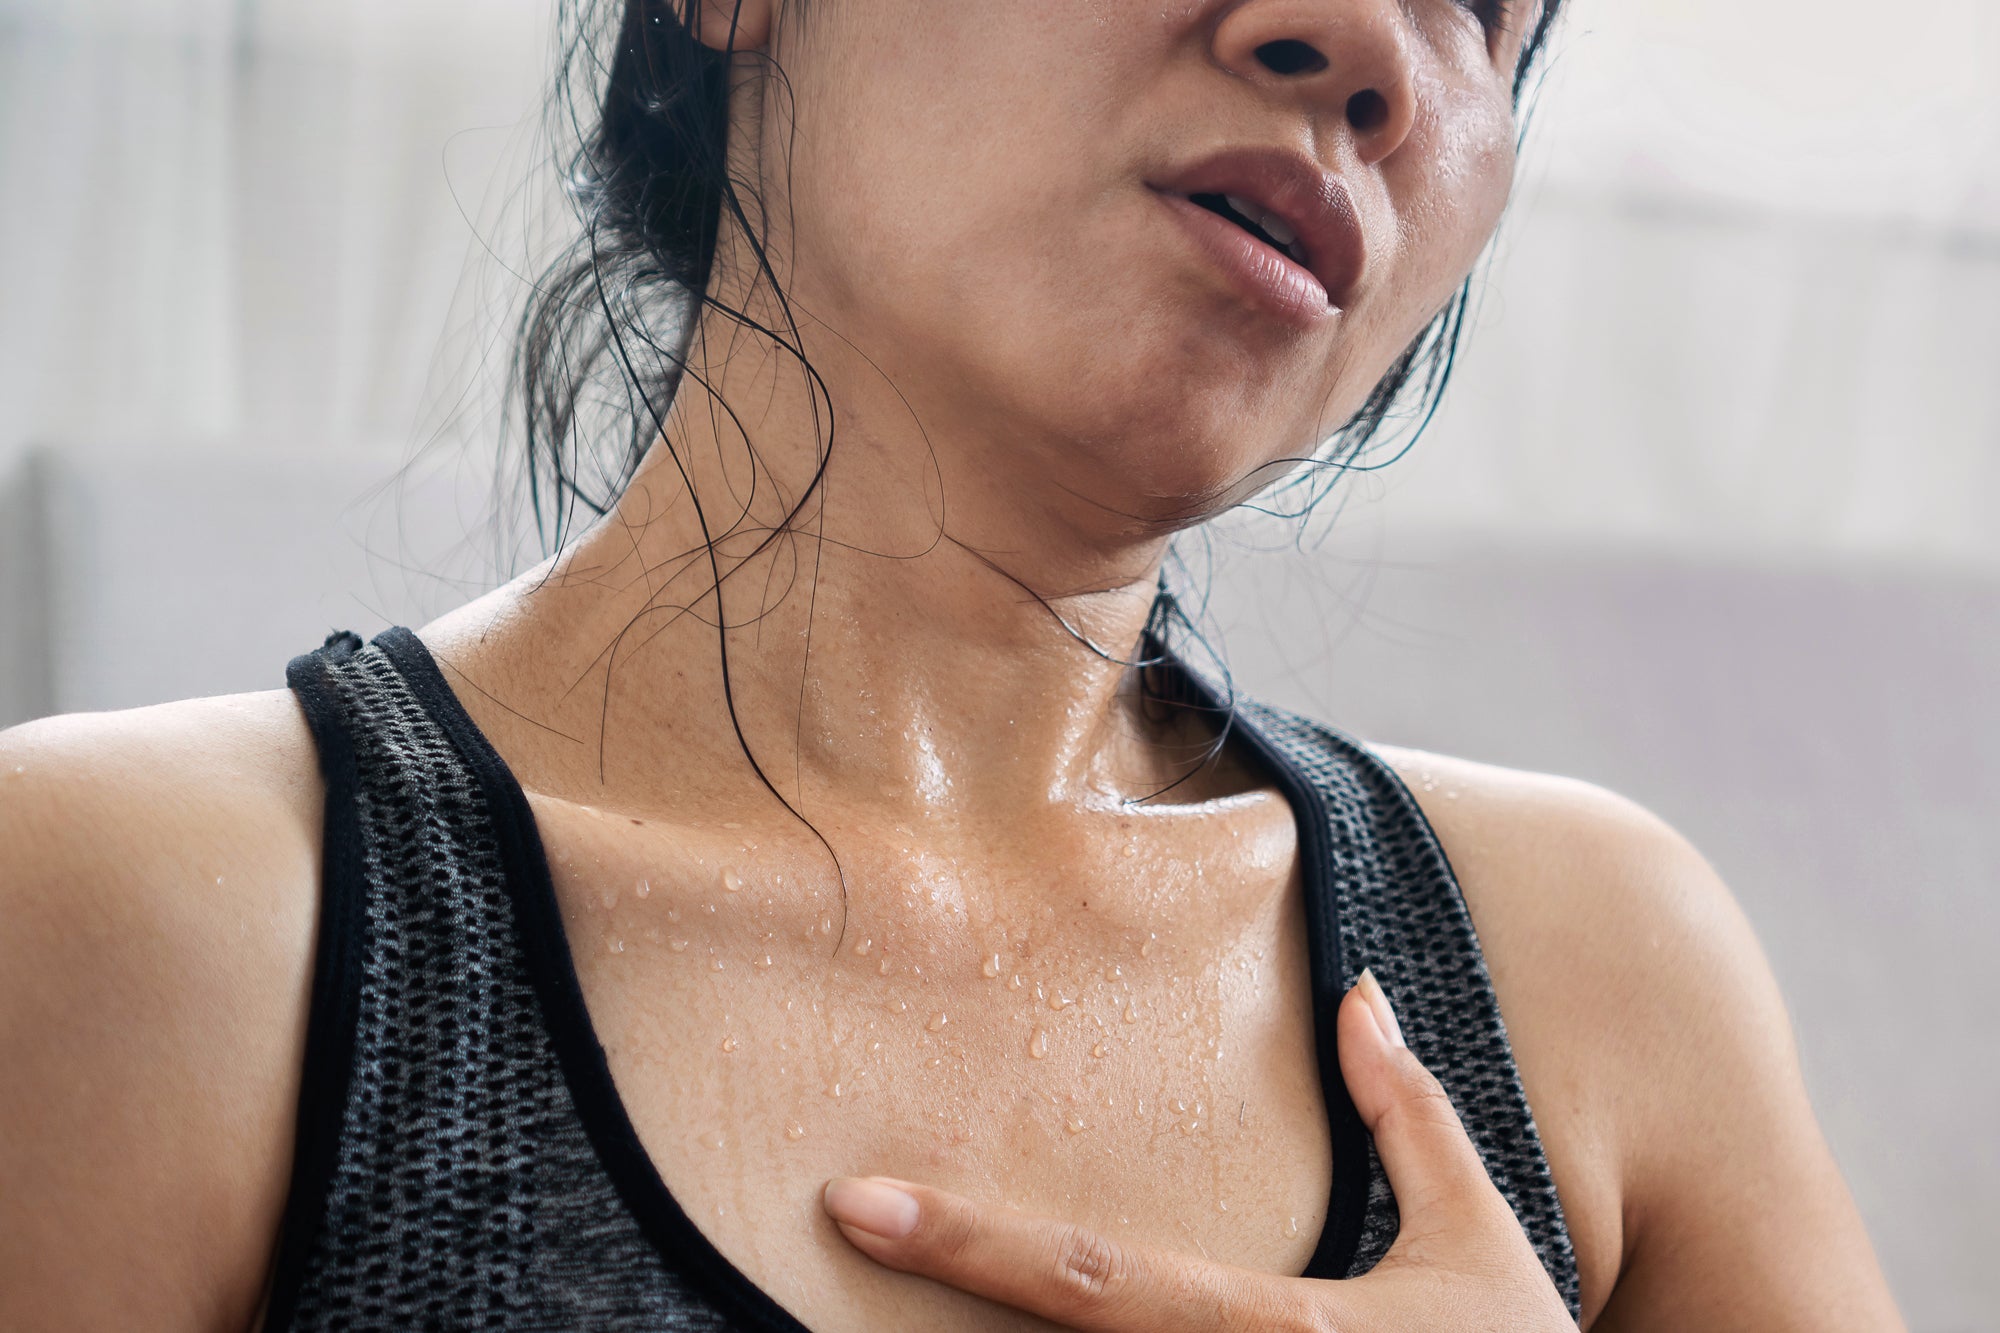 Stock photograph of Asian female model appearing to be overheated, sweating, with one hand placed on chest